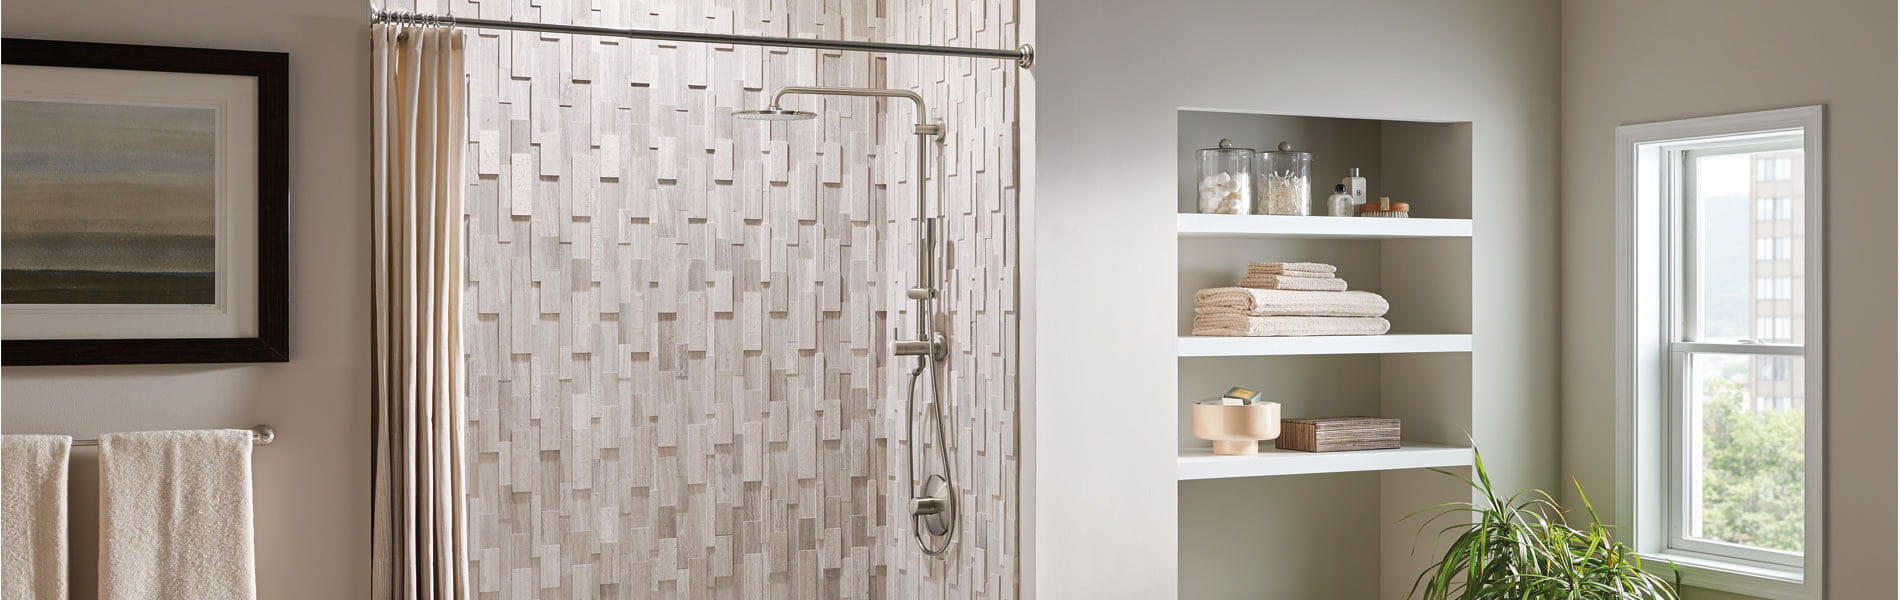 Euphoria cosmopolitan shower with a wooden panel shower tile background.